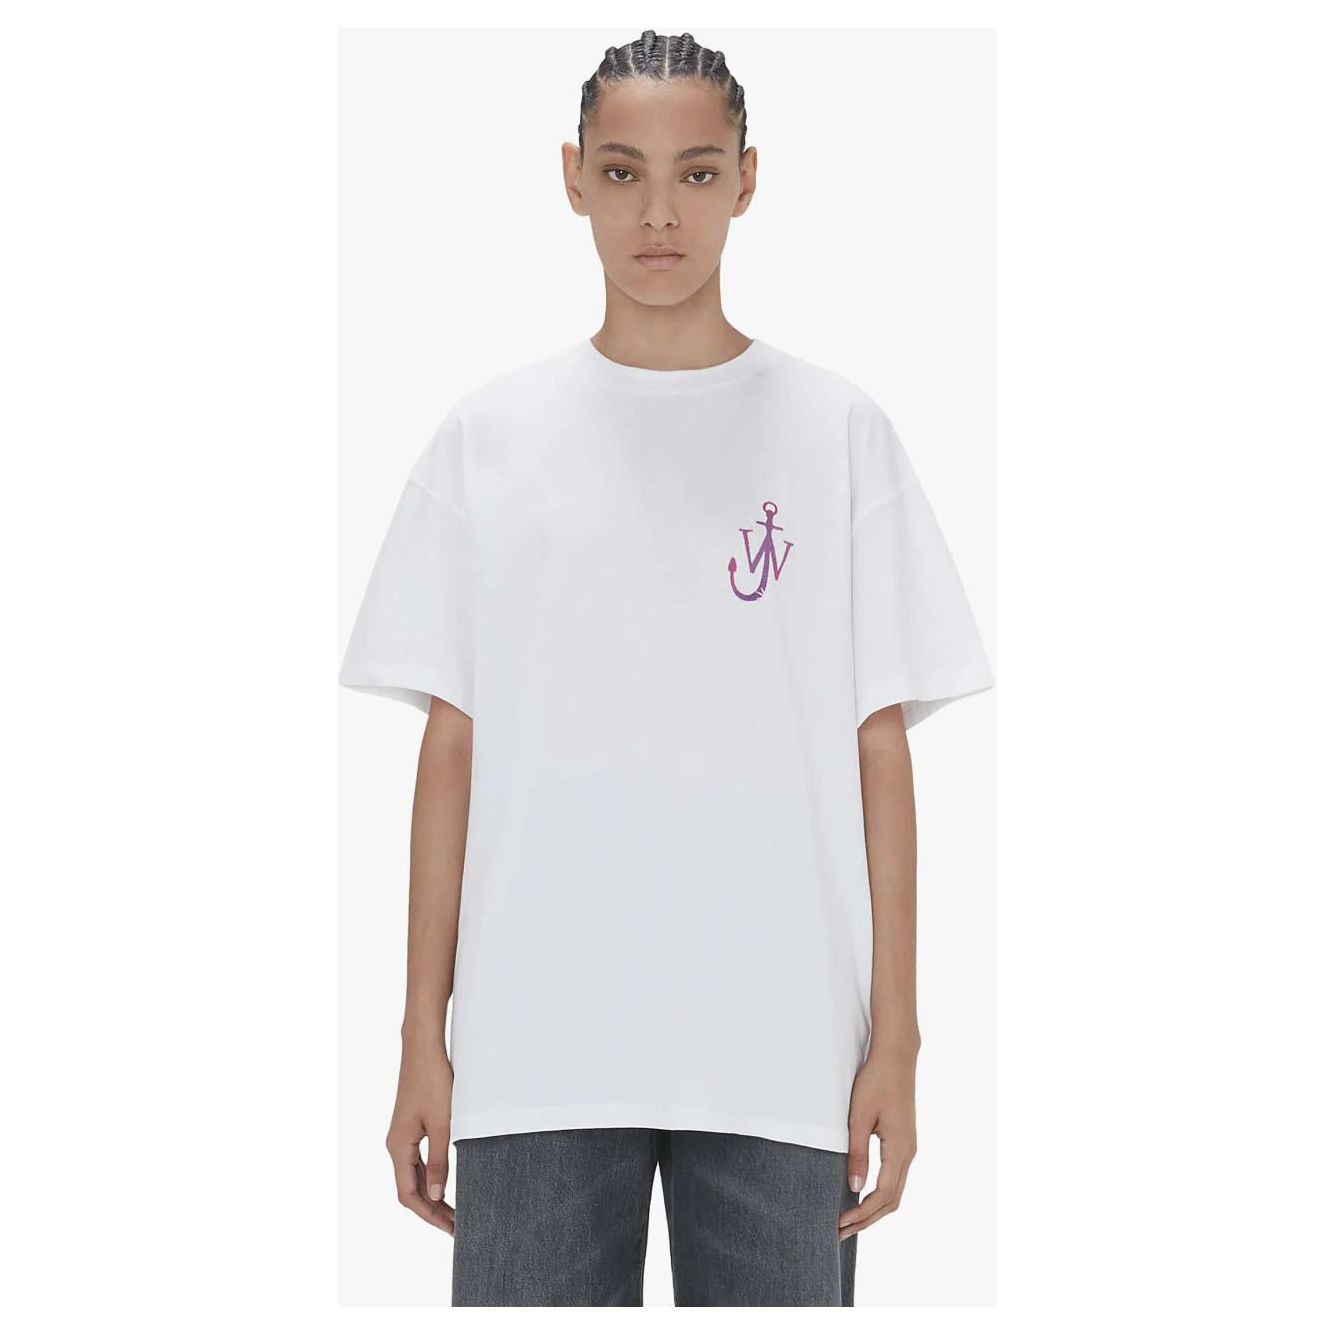 JW ANDERSON "NATURALLY SWEET" CLASSIC T-SHIRT - Yooto